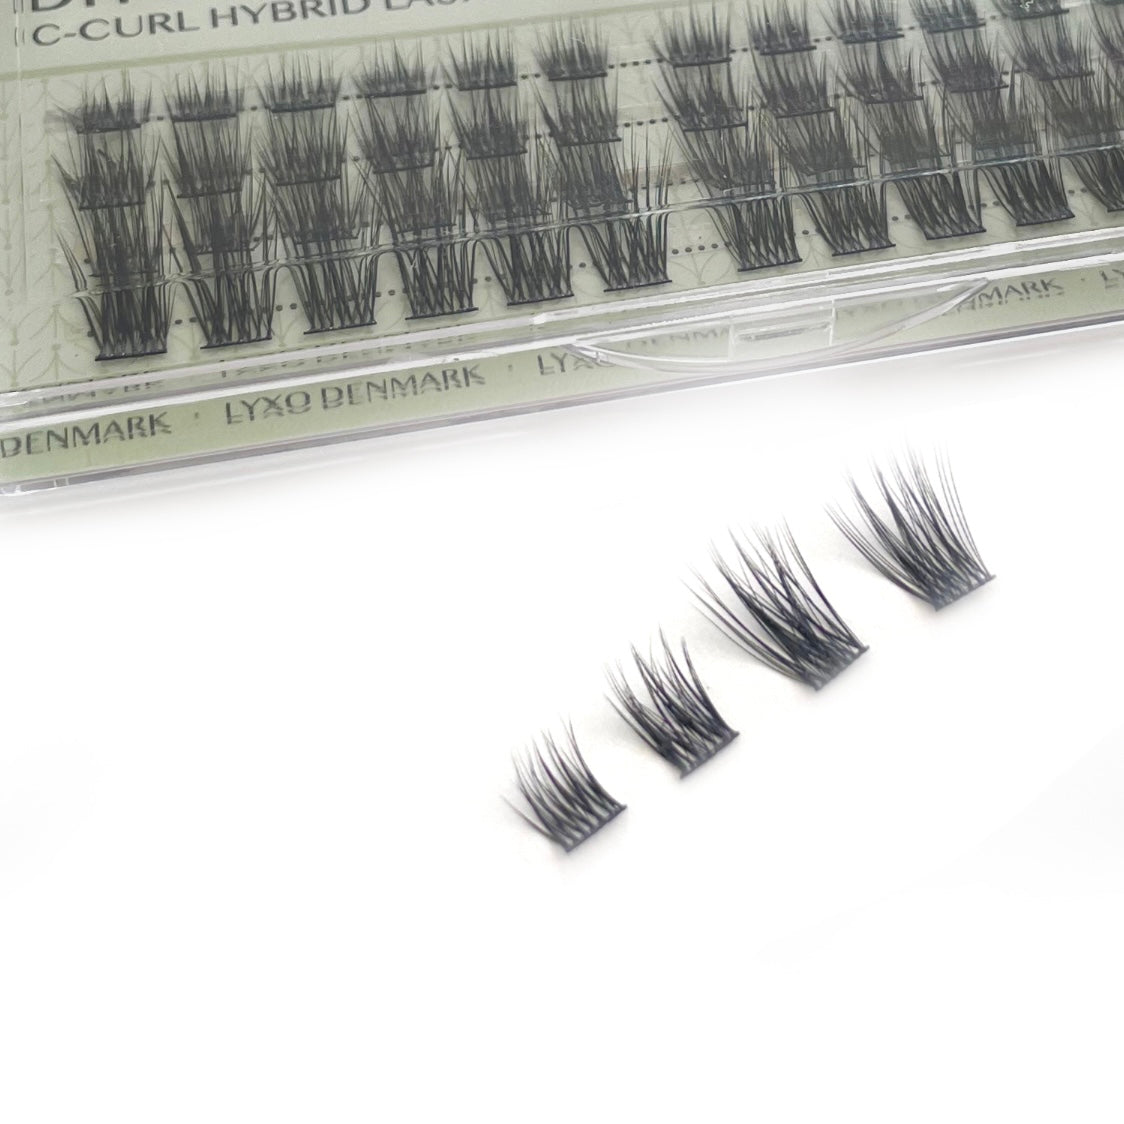 Hybrid C-curl Clusters/Lashes